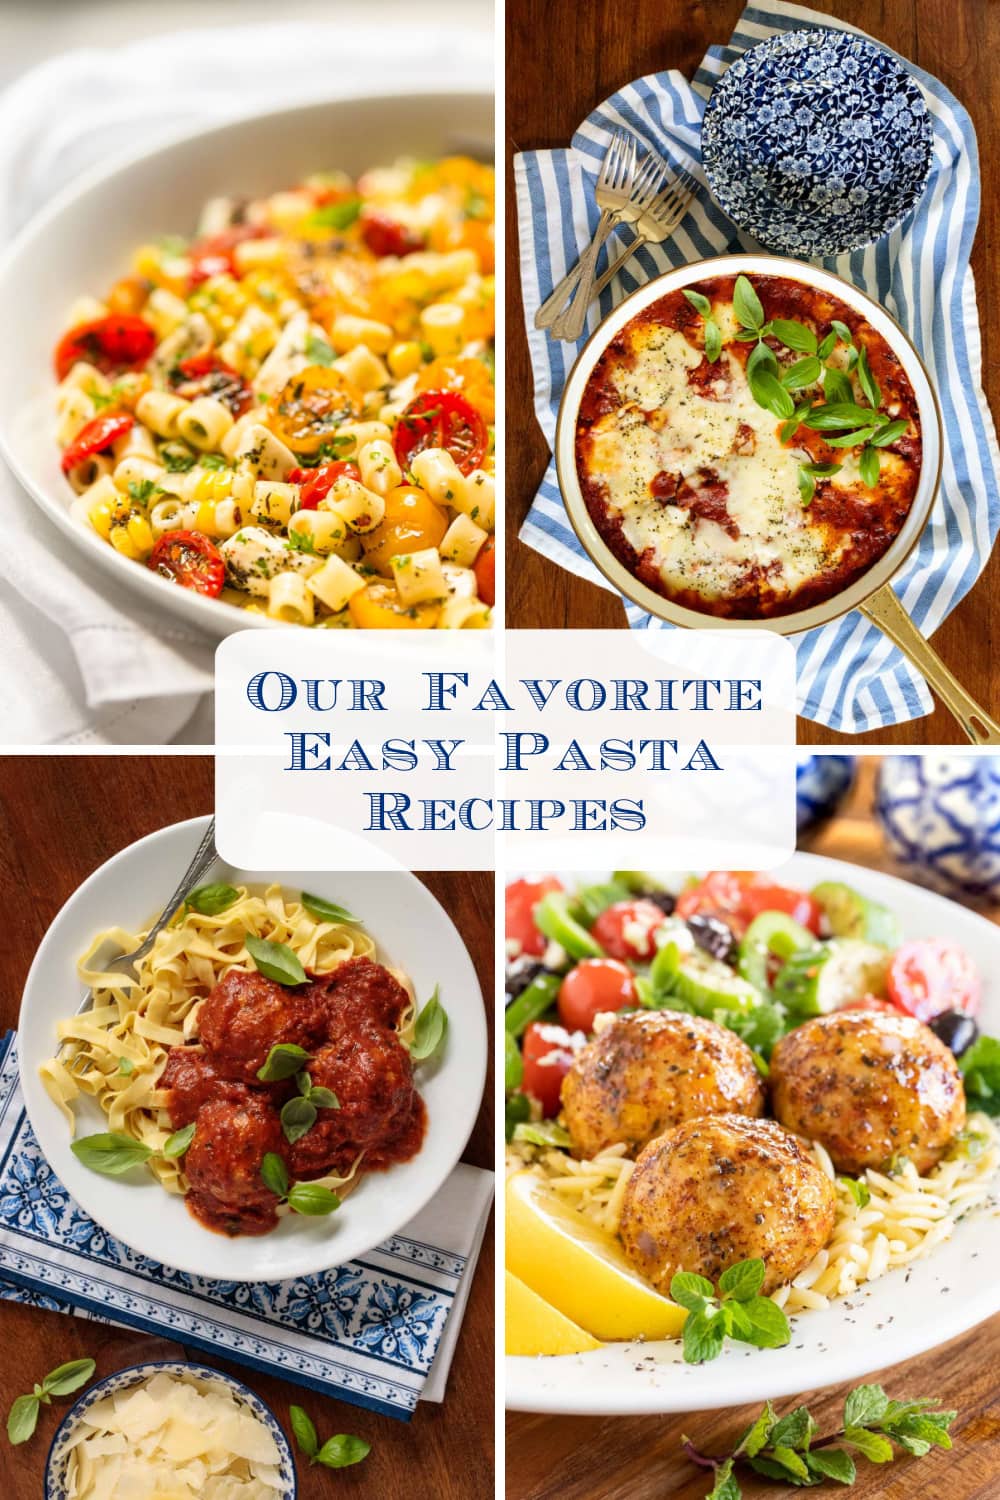 Ten Fabulous Pasta Recipes That Never Get Old